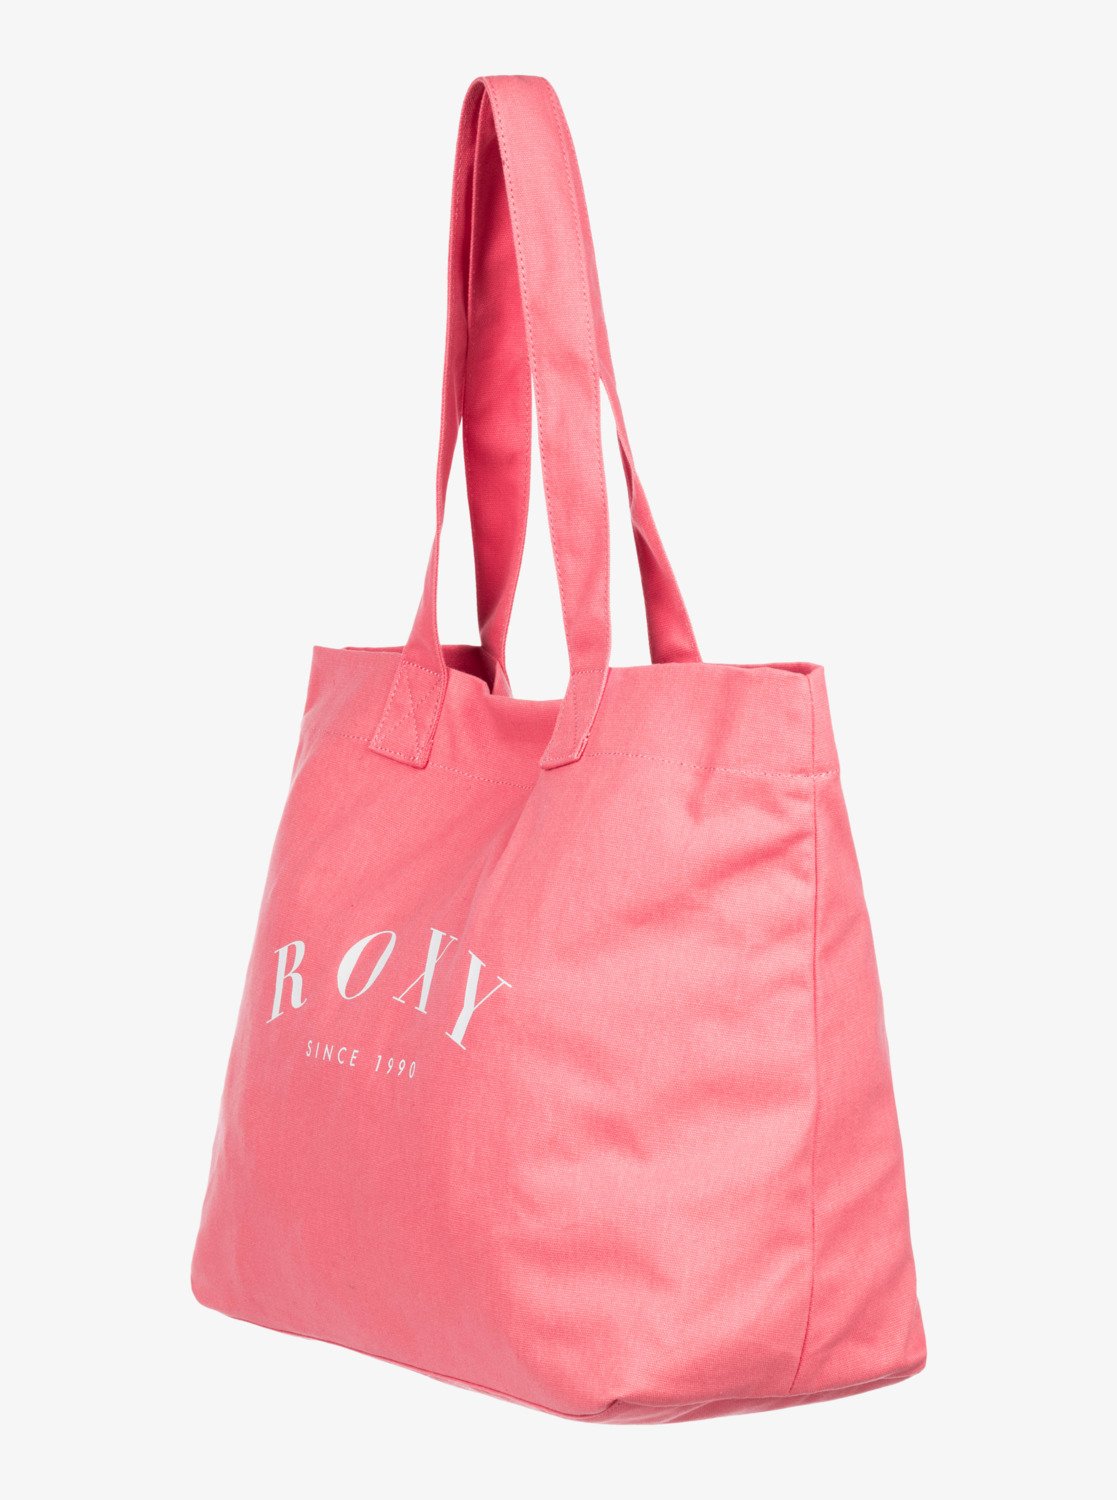 BOLSO GO FOR IT ROXY MUJER